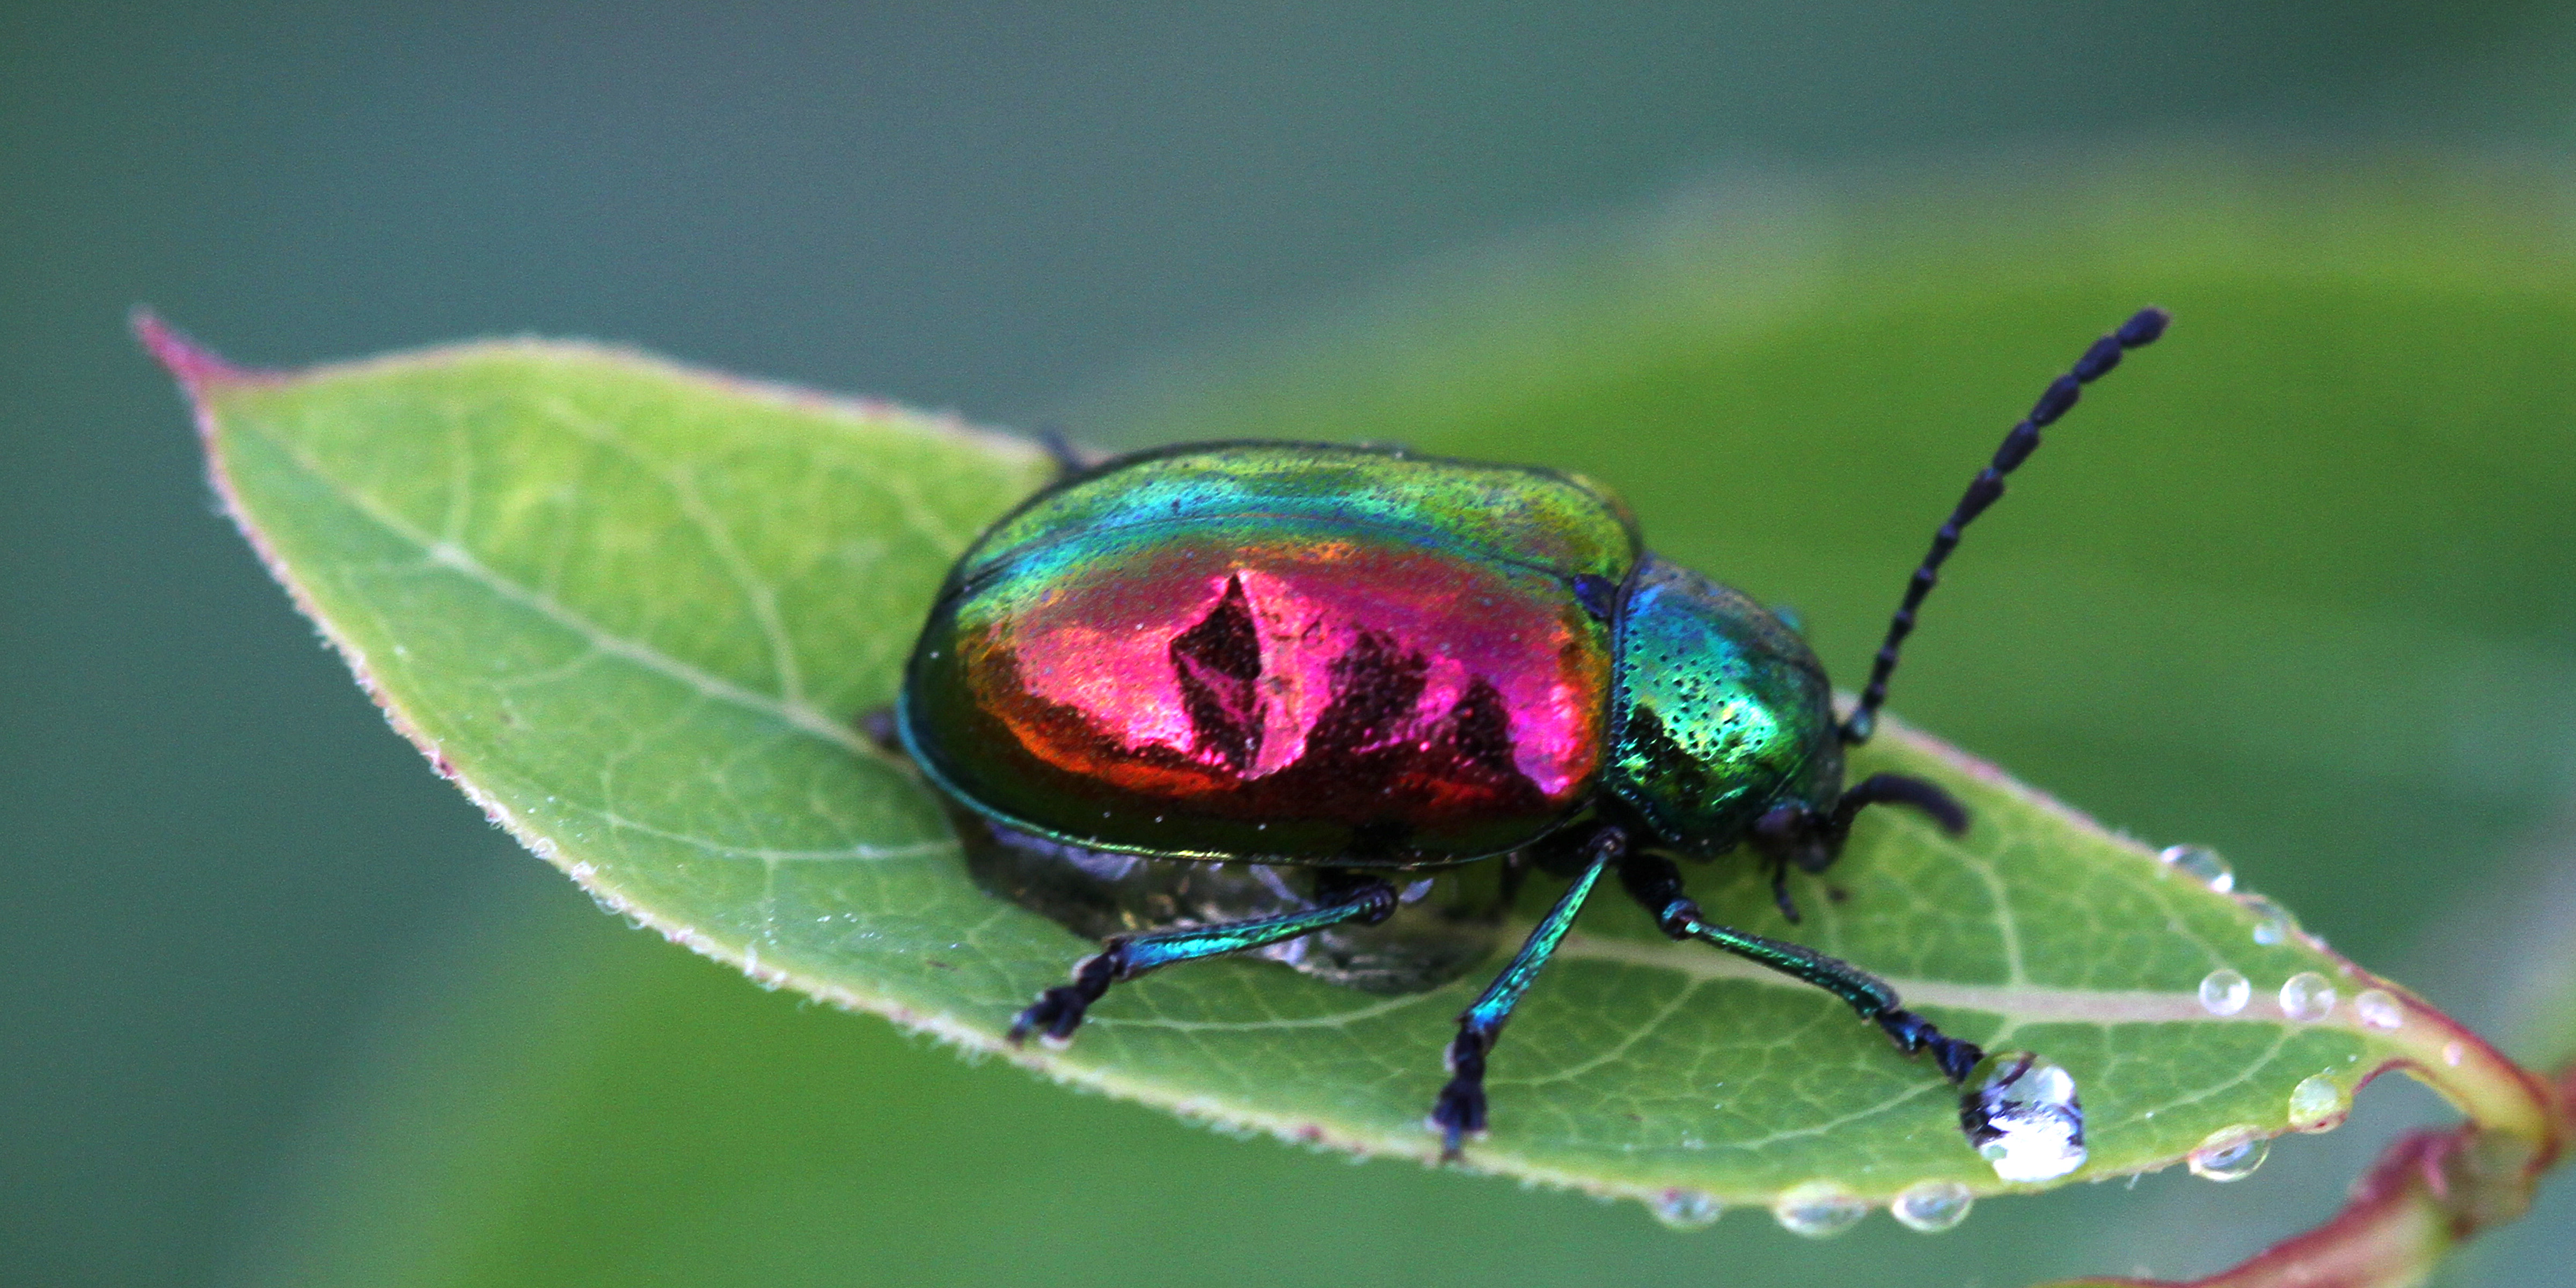 Dogbane Beetle – Welcome to a photographic journey through the ...